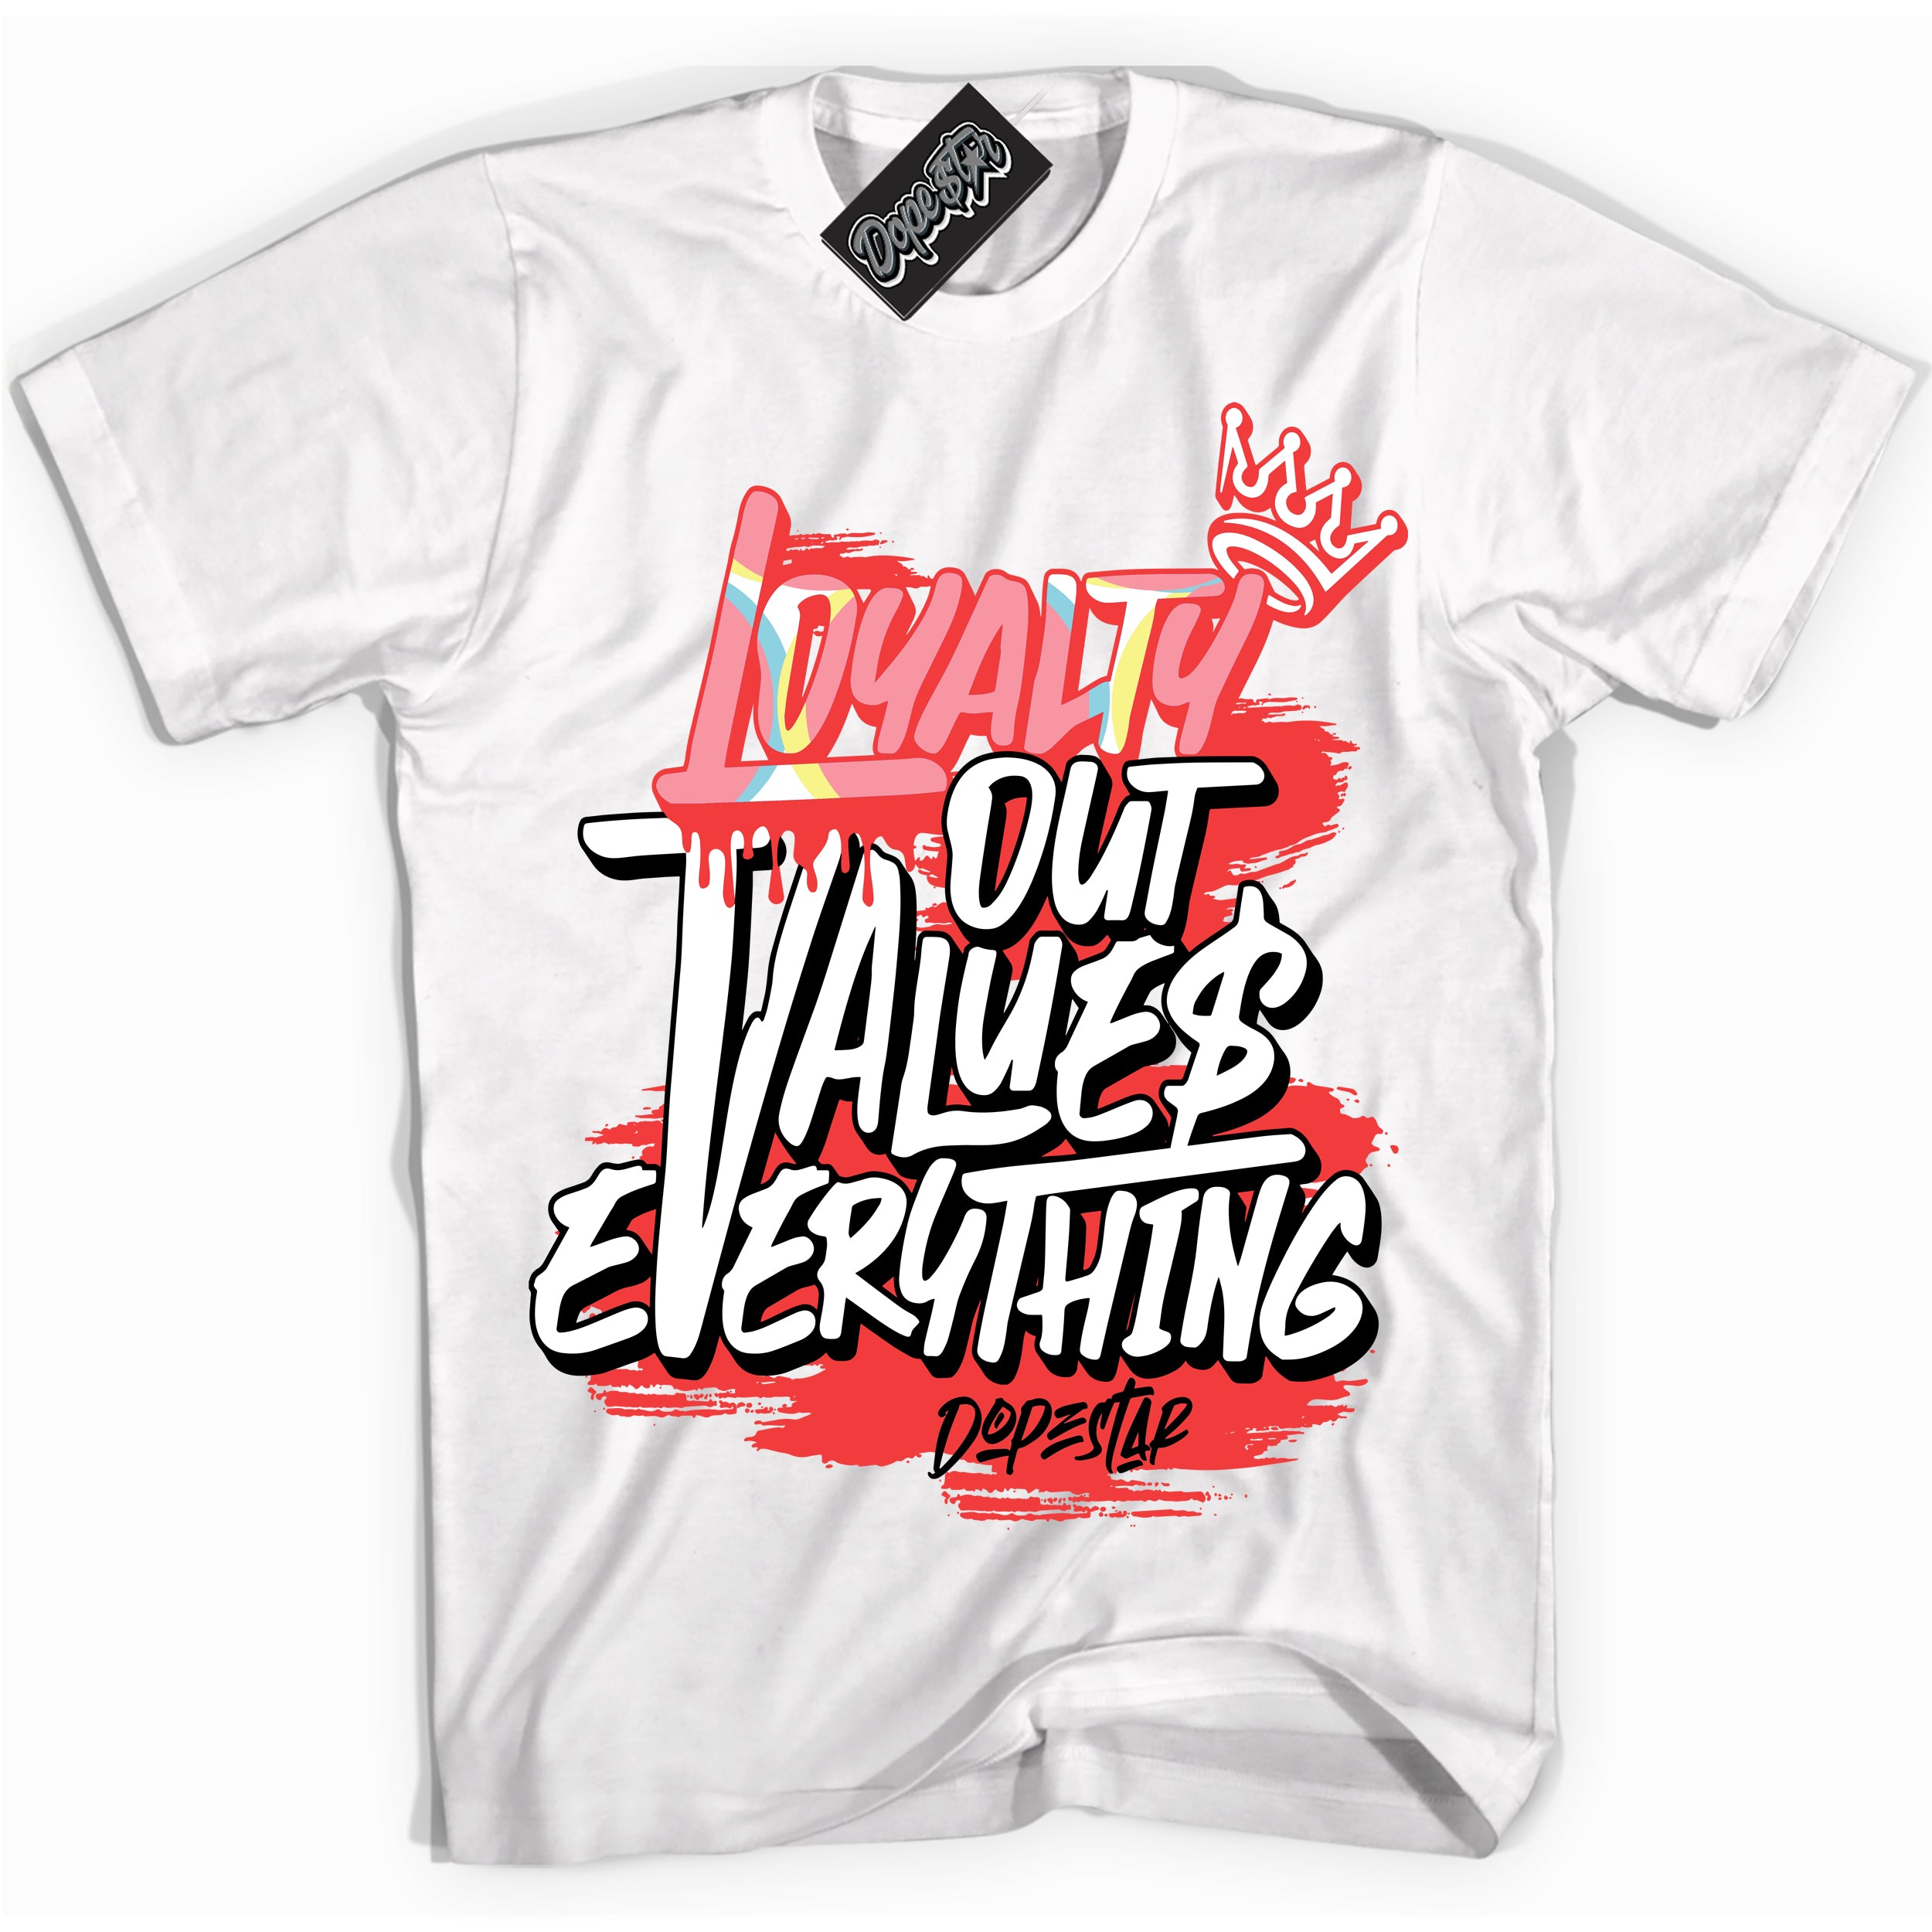 Cool White graphic tee with “ Loyalty Out Values Everything ” design, that perfectly matches Spider-Verse 1s sneakers 